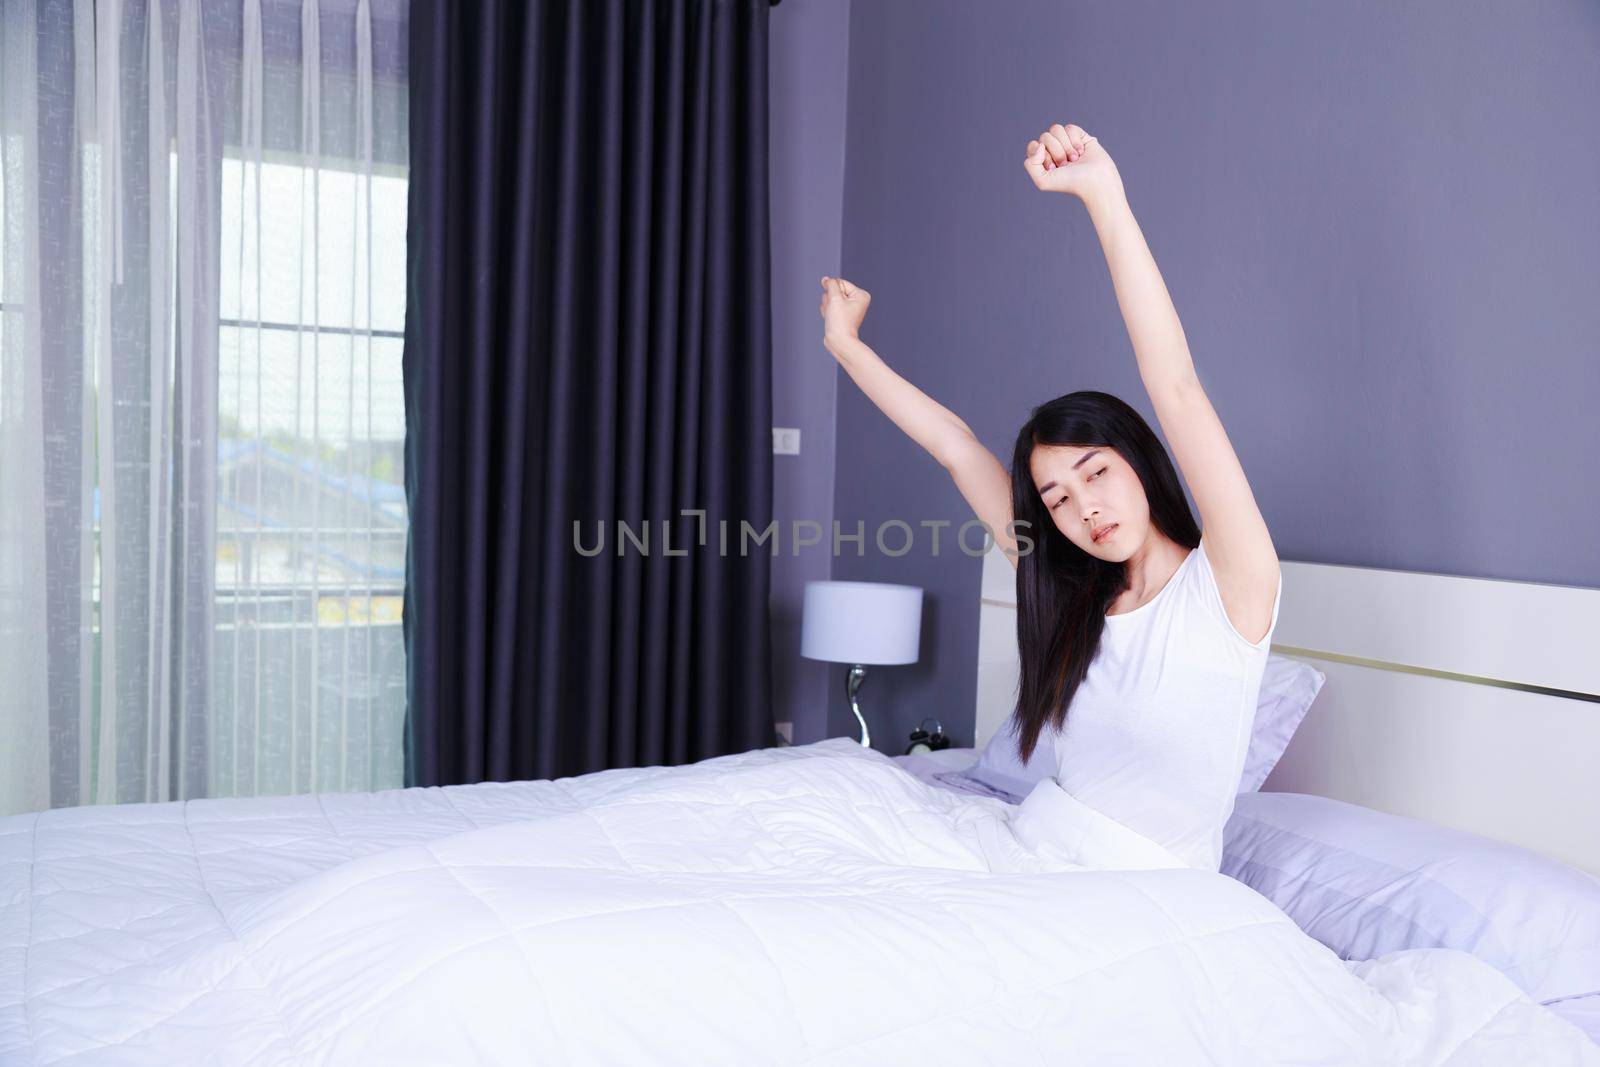 Woman waking up and hand raised on bed in the bedroom